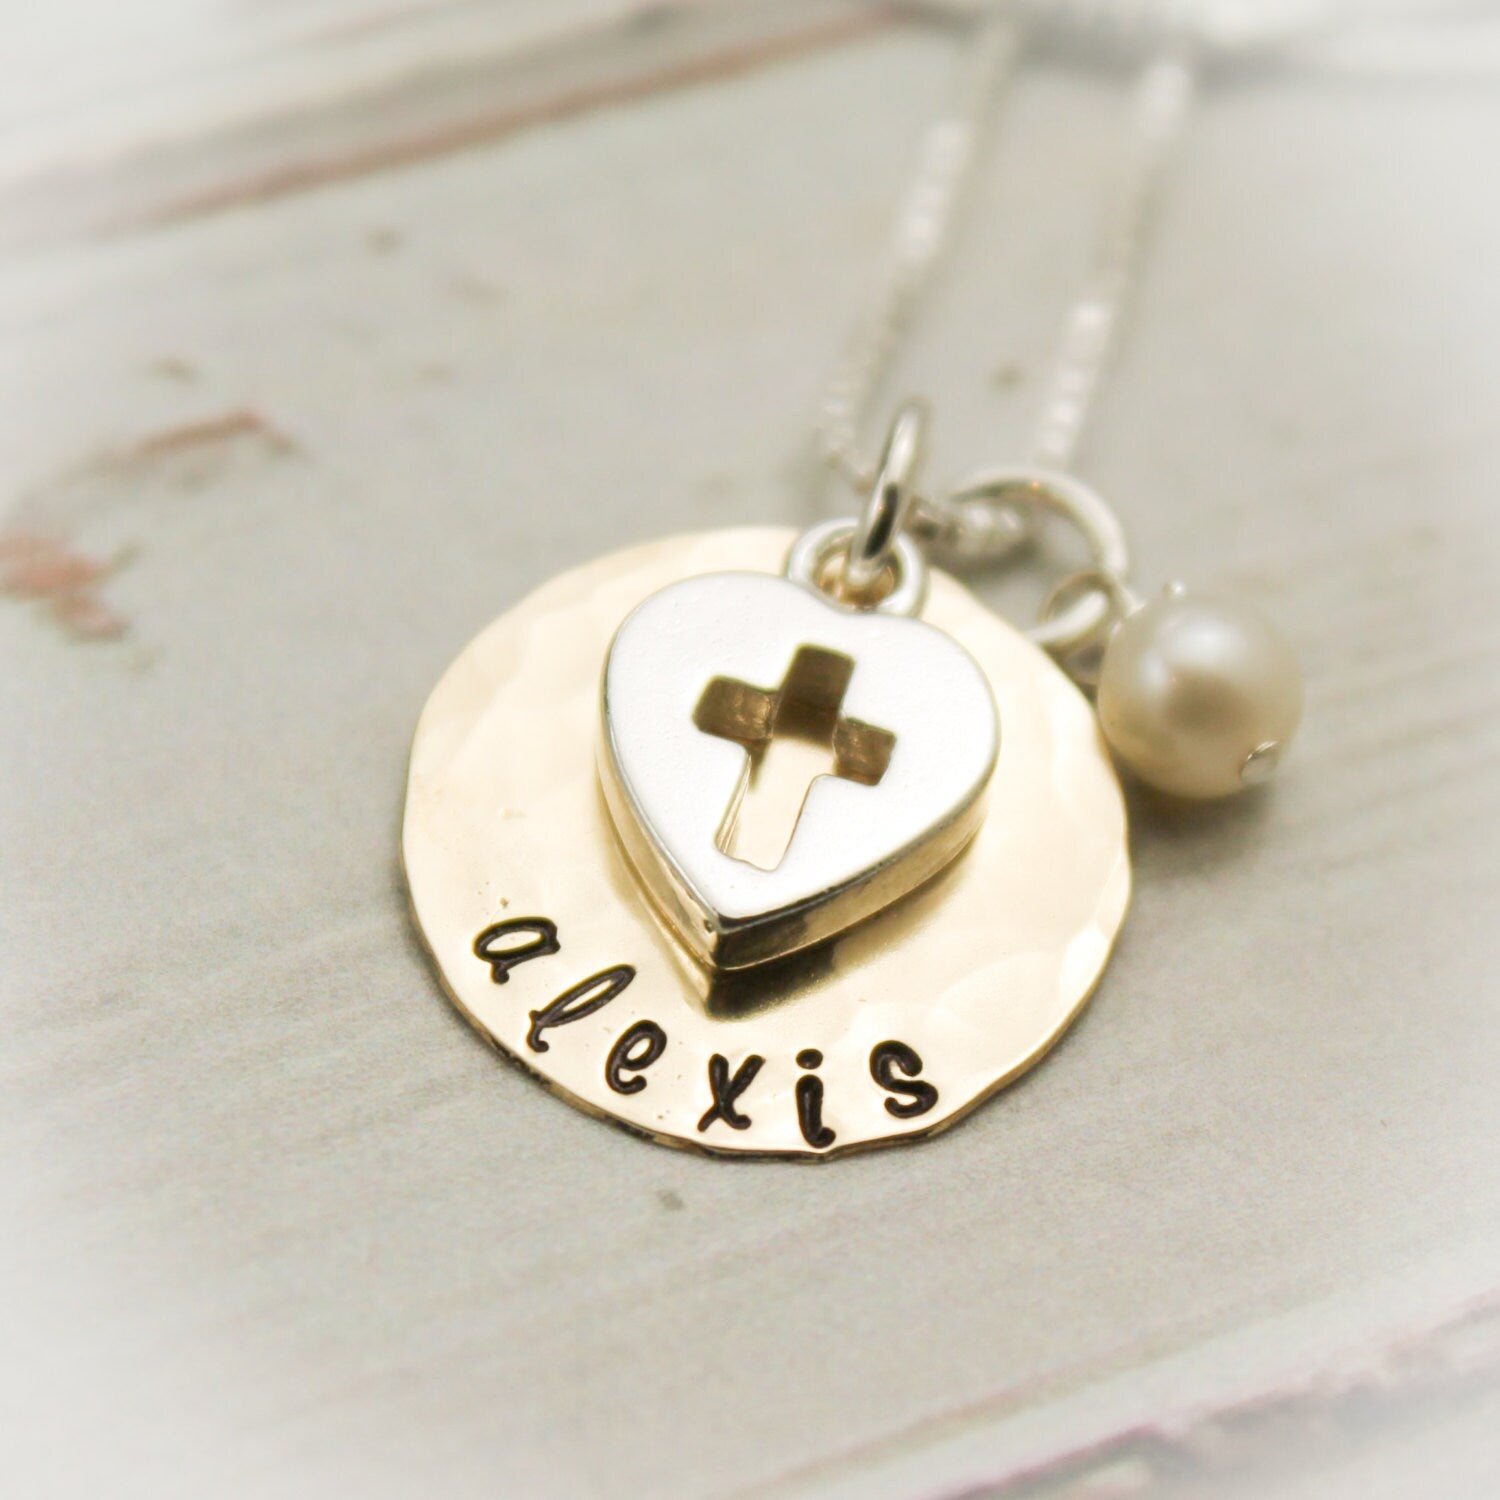 Confirmation Necklace Personalized Hand Stamped 14K Gold Filled and Sterling Silver with Heart Cross Charm